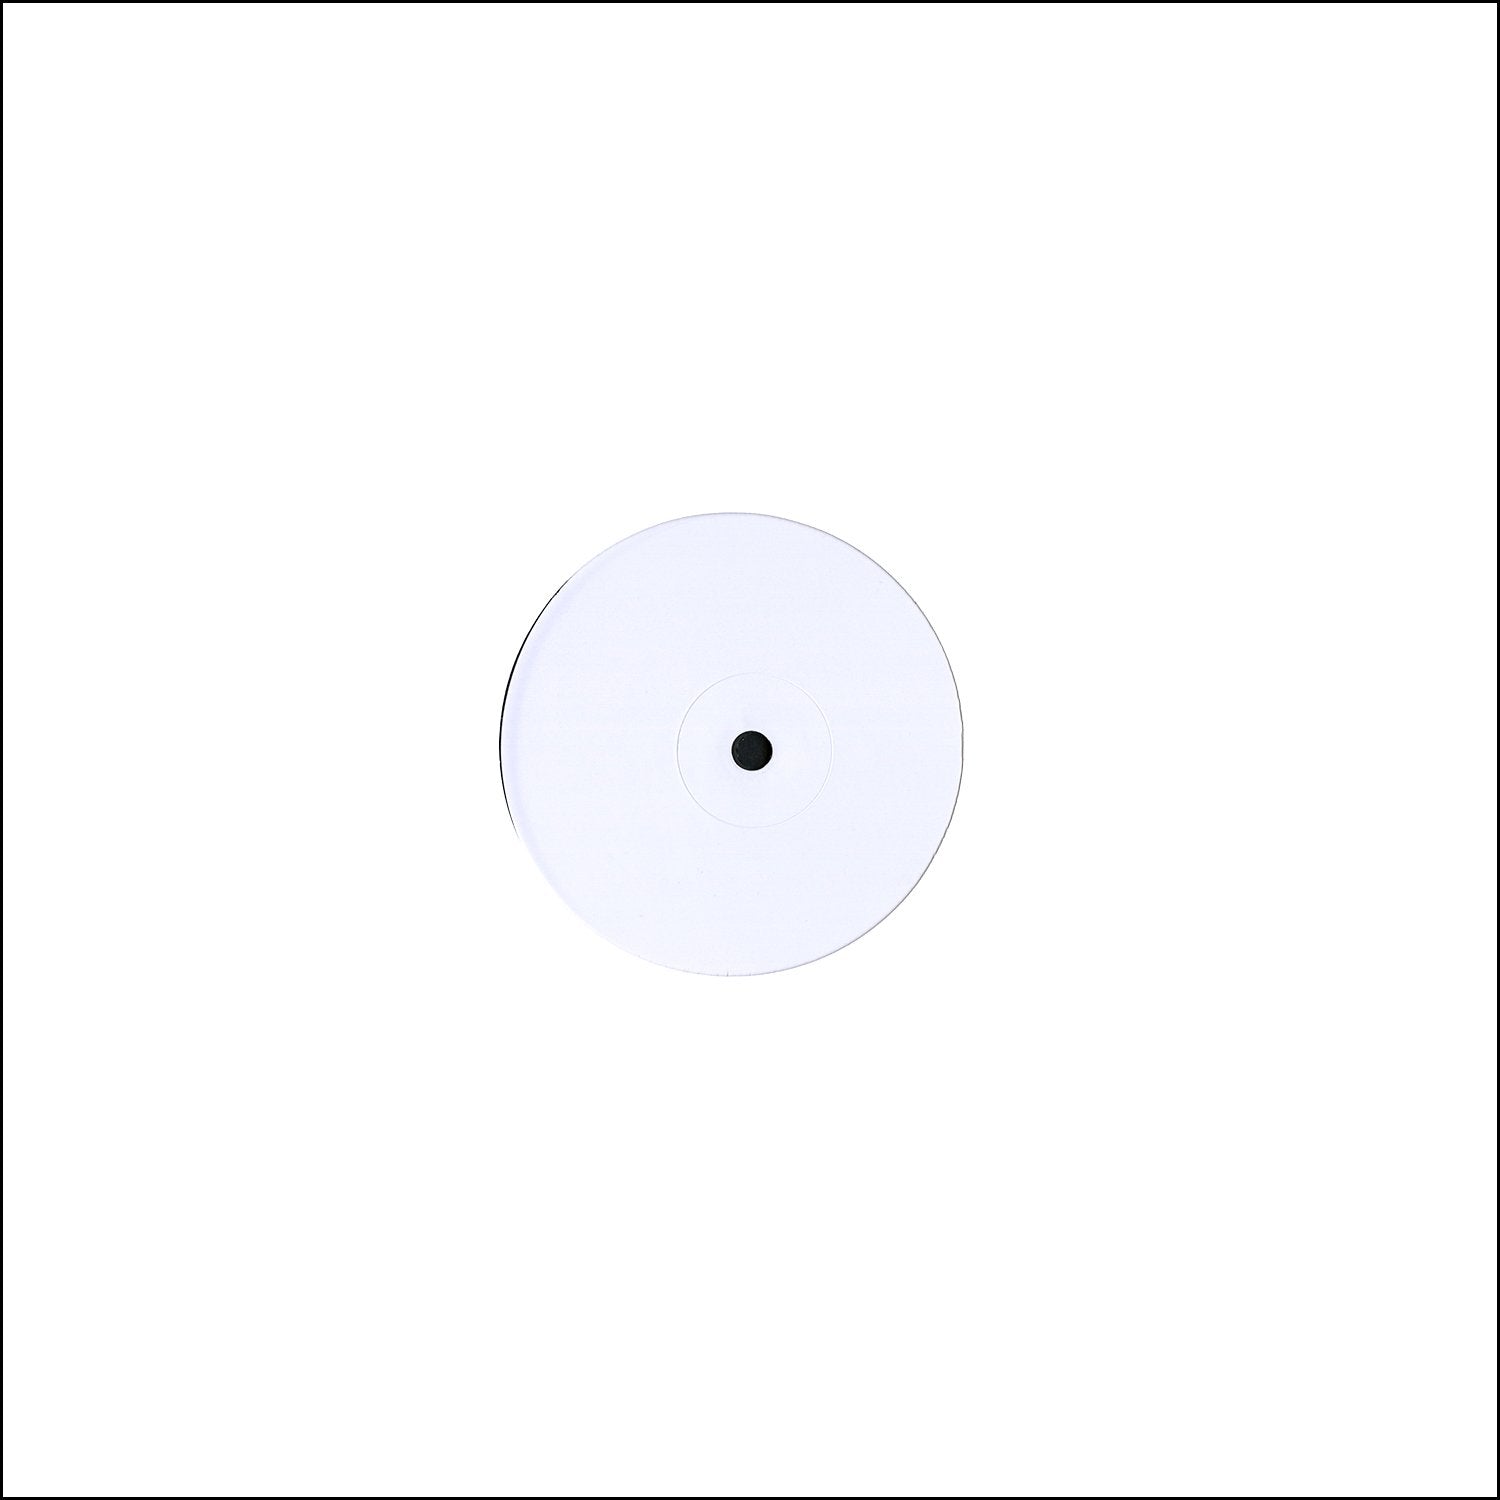 Serious Thing [Test Pressing]